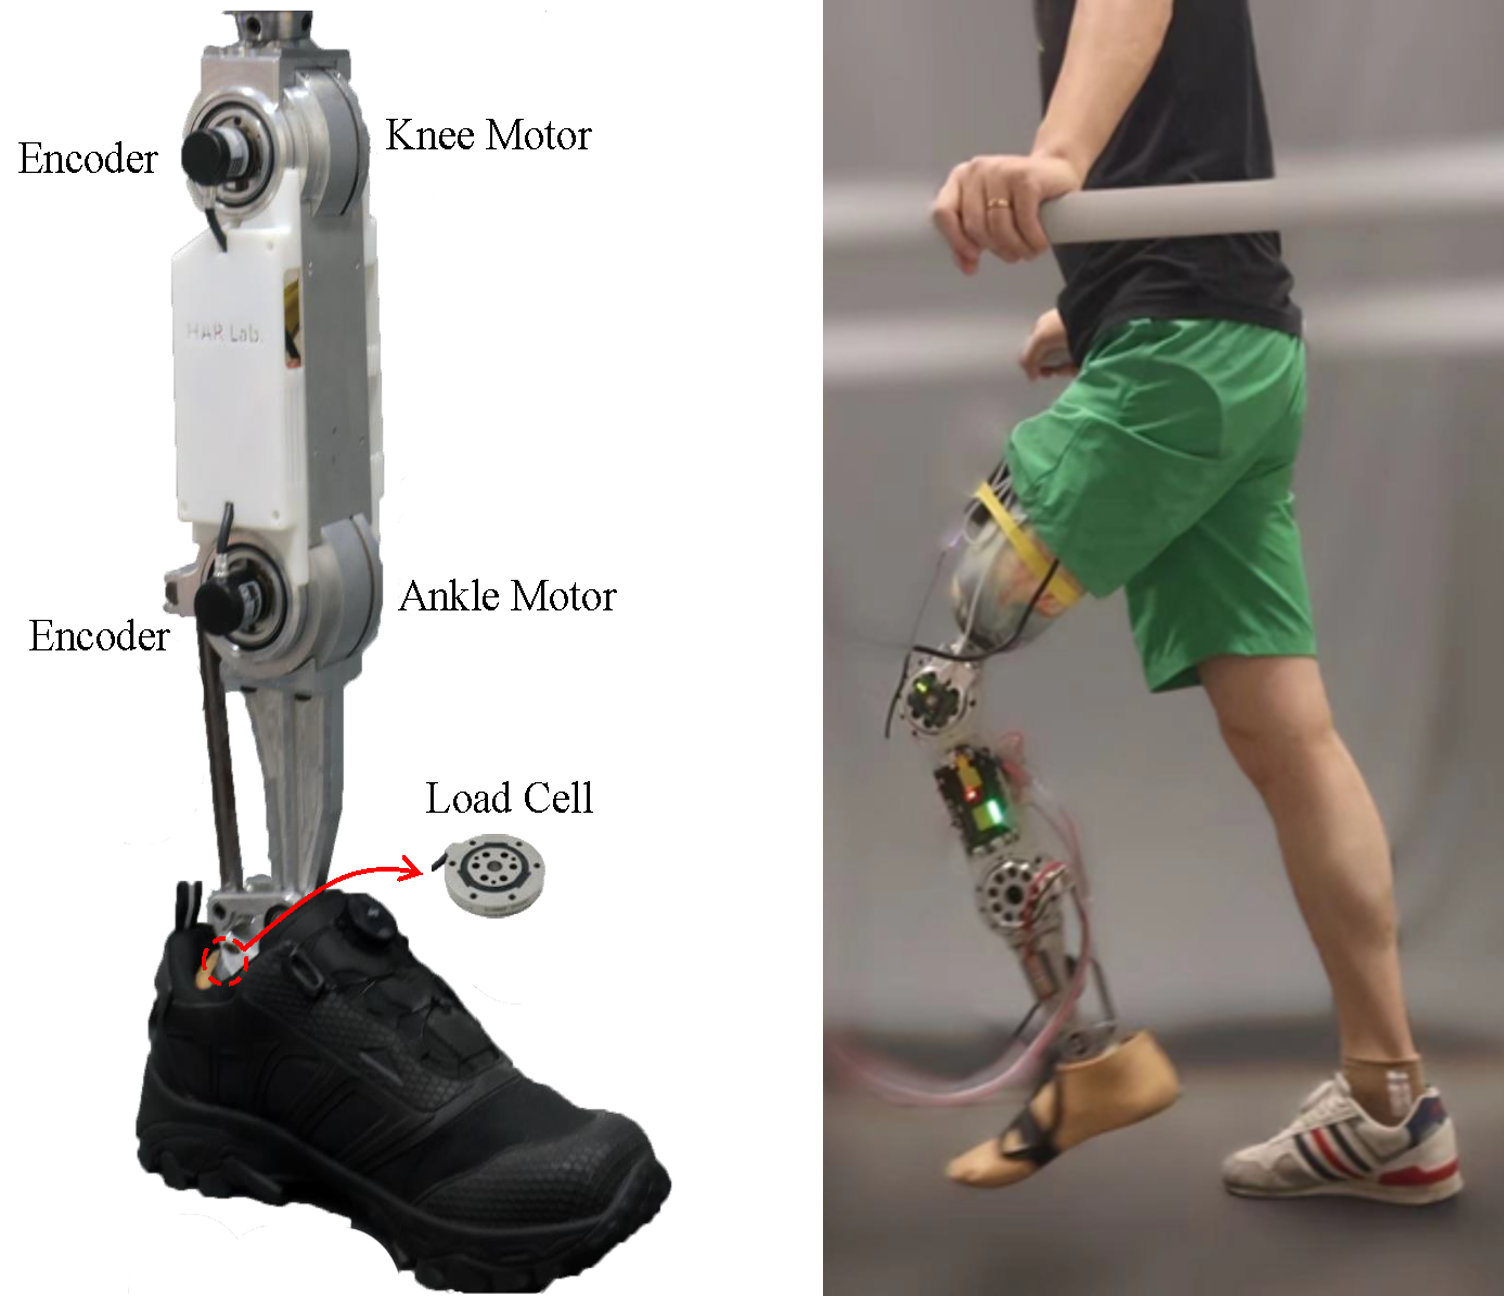 knee-ankle-prostheses